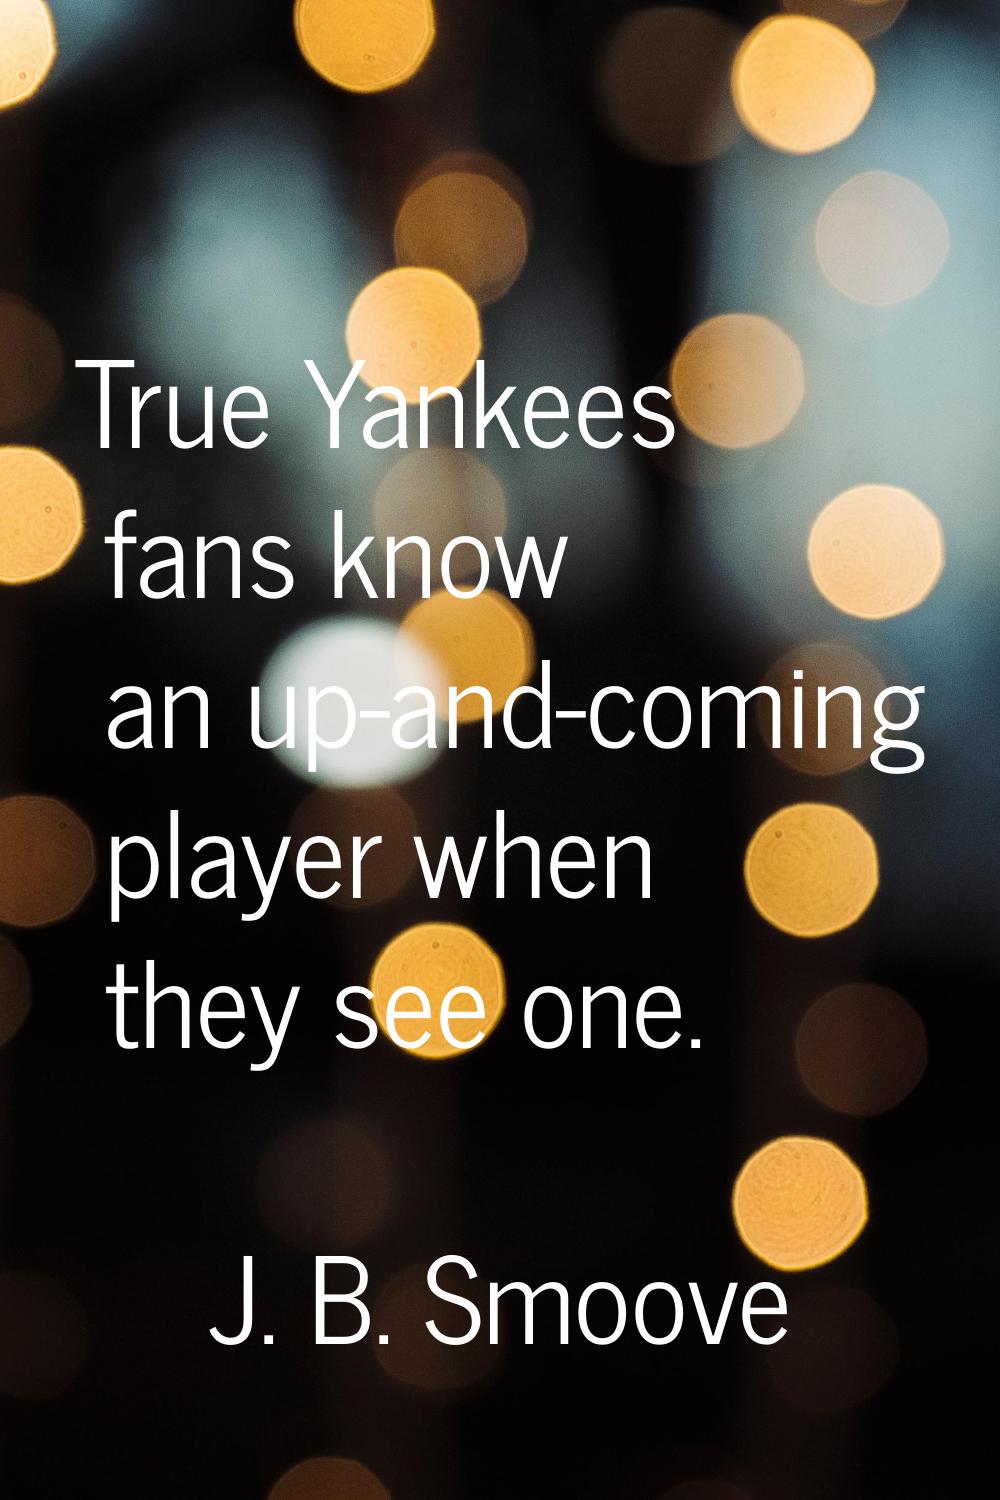 True Yankees fans know an up-and-coming player when they see one.